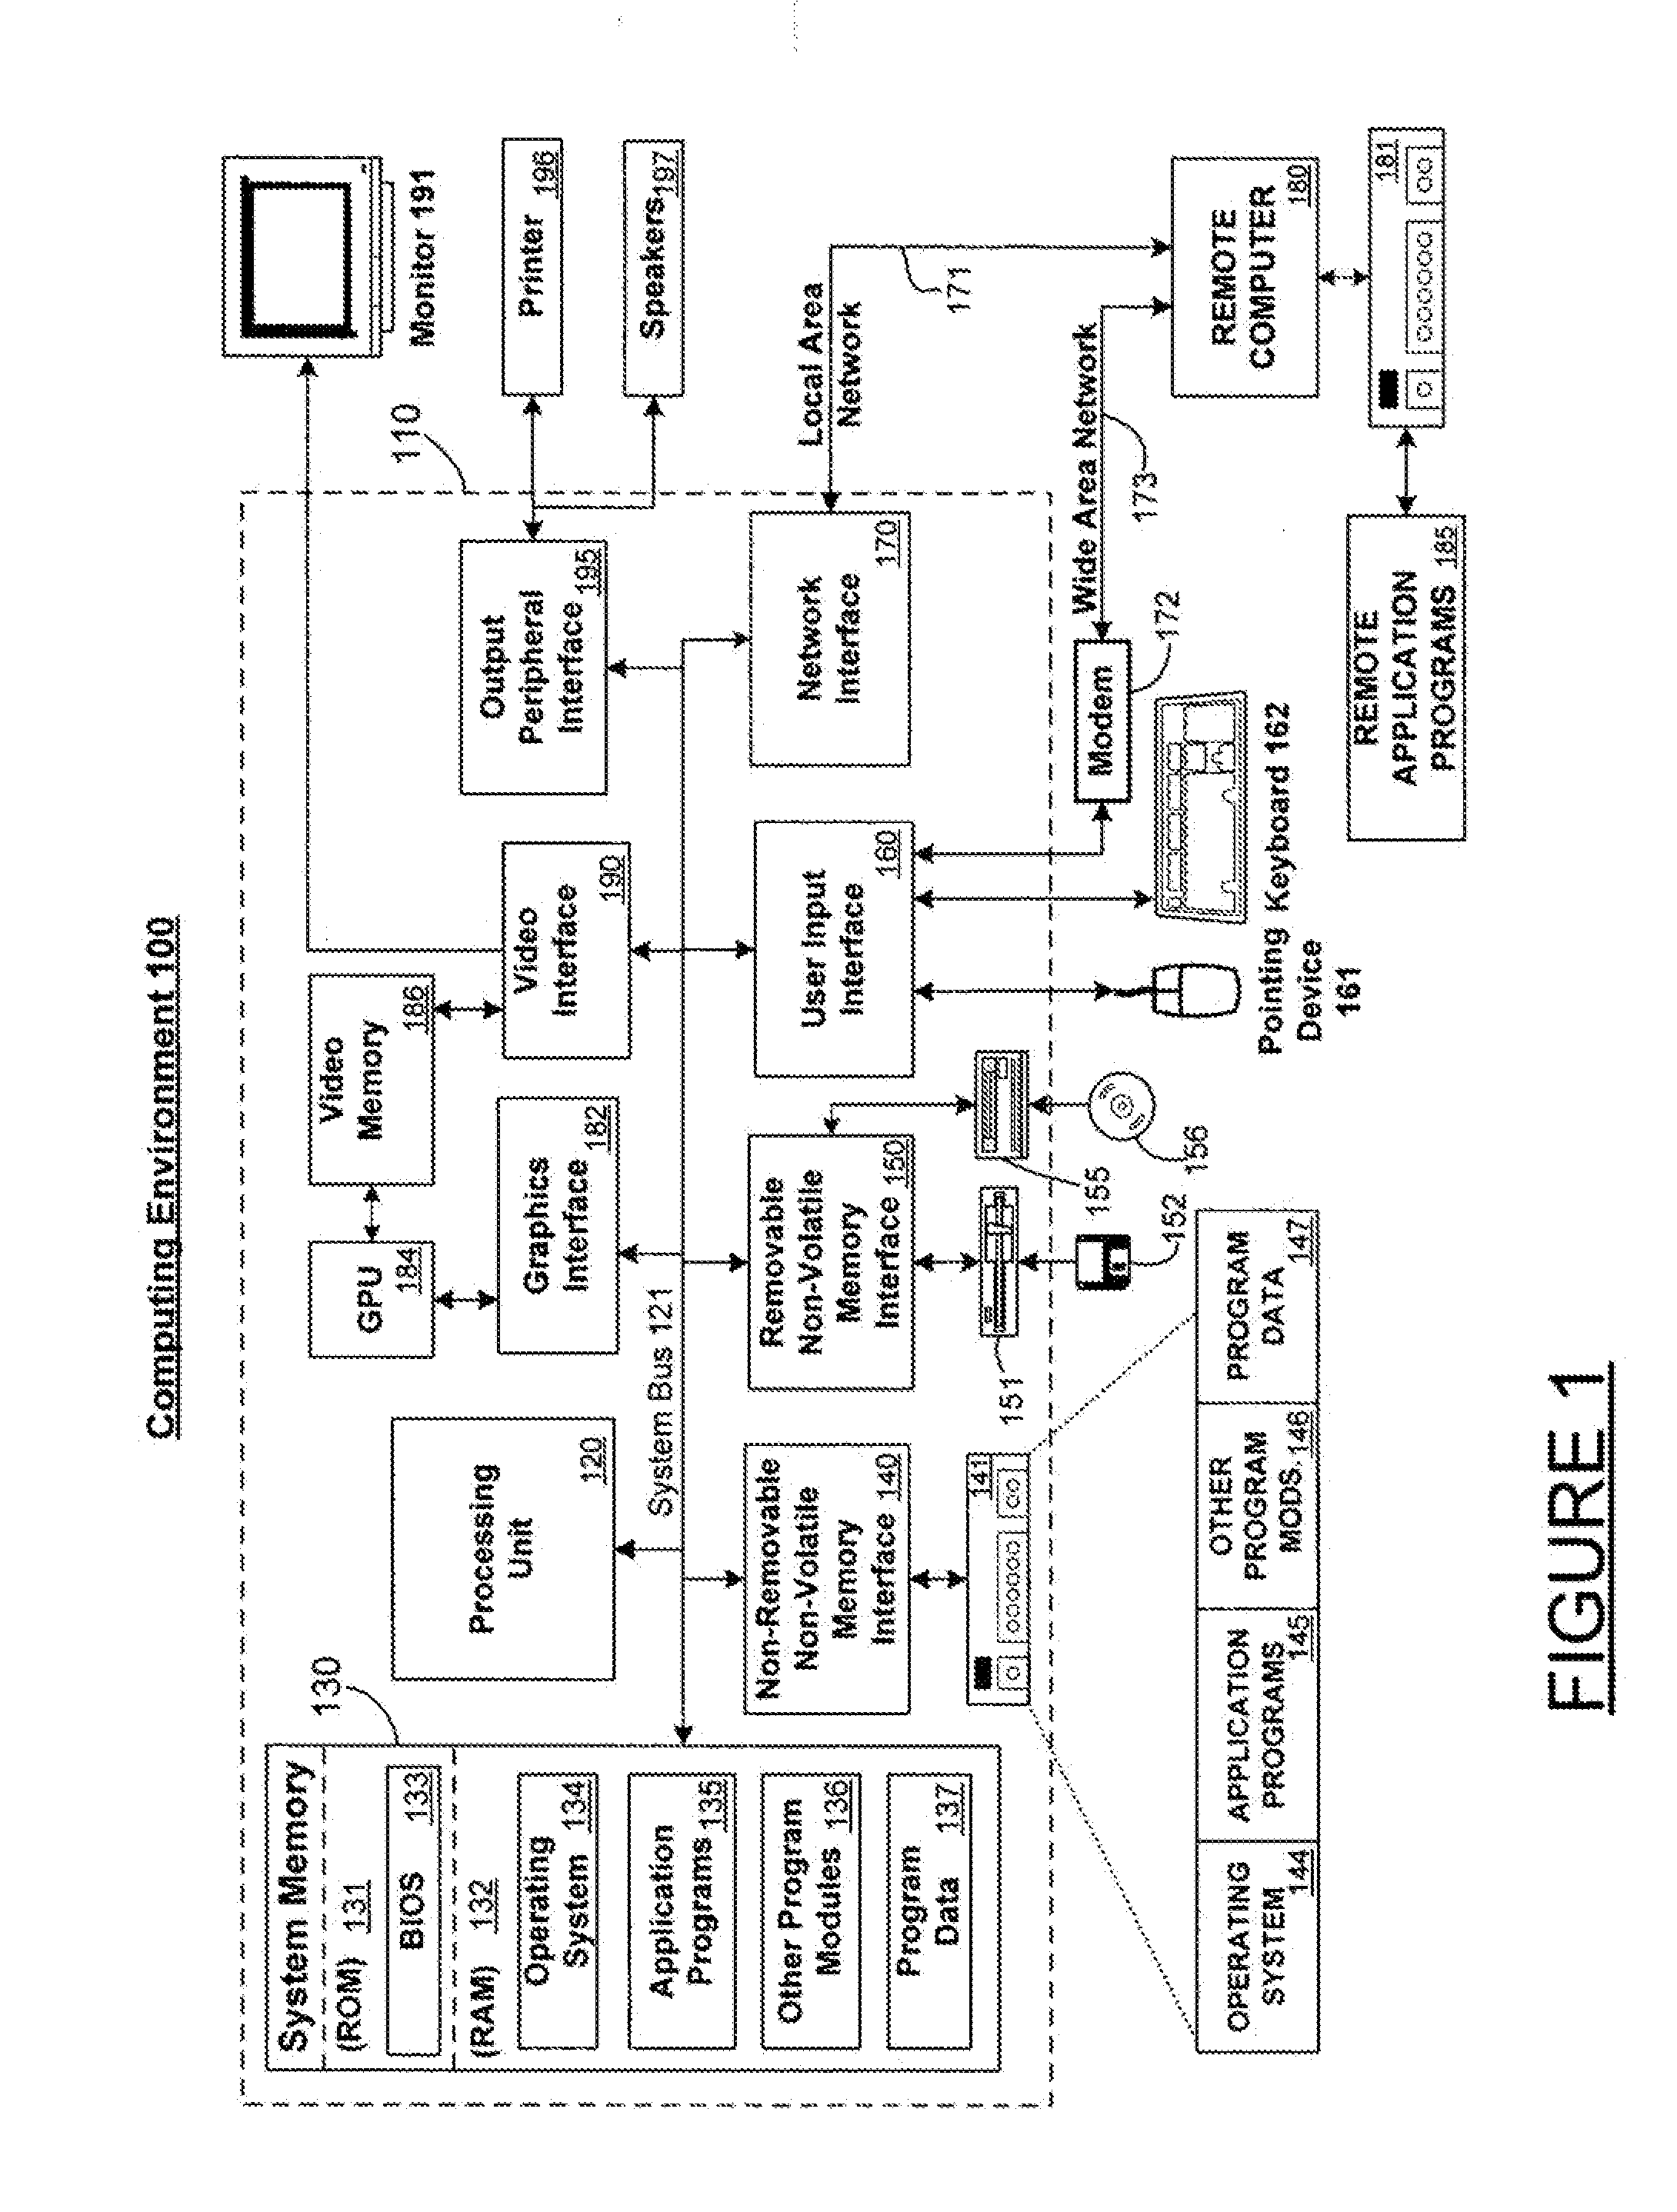 Mobile device application, system and method for marketing to consumers during a buying decision